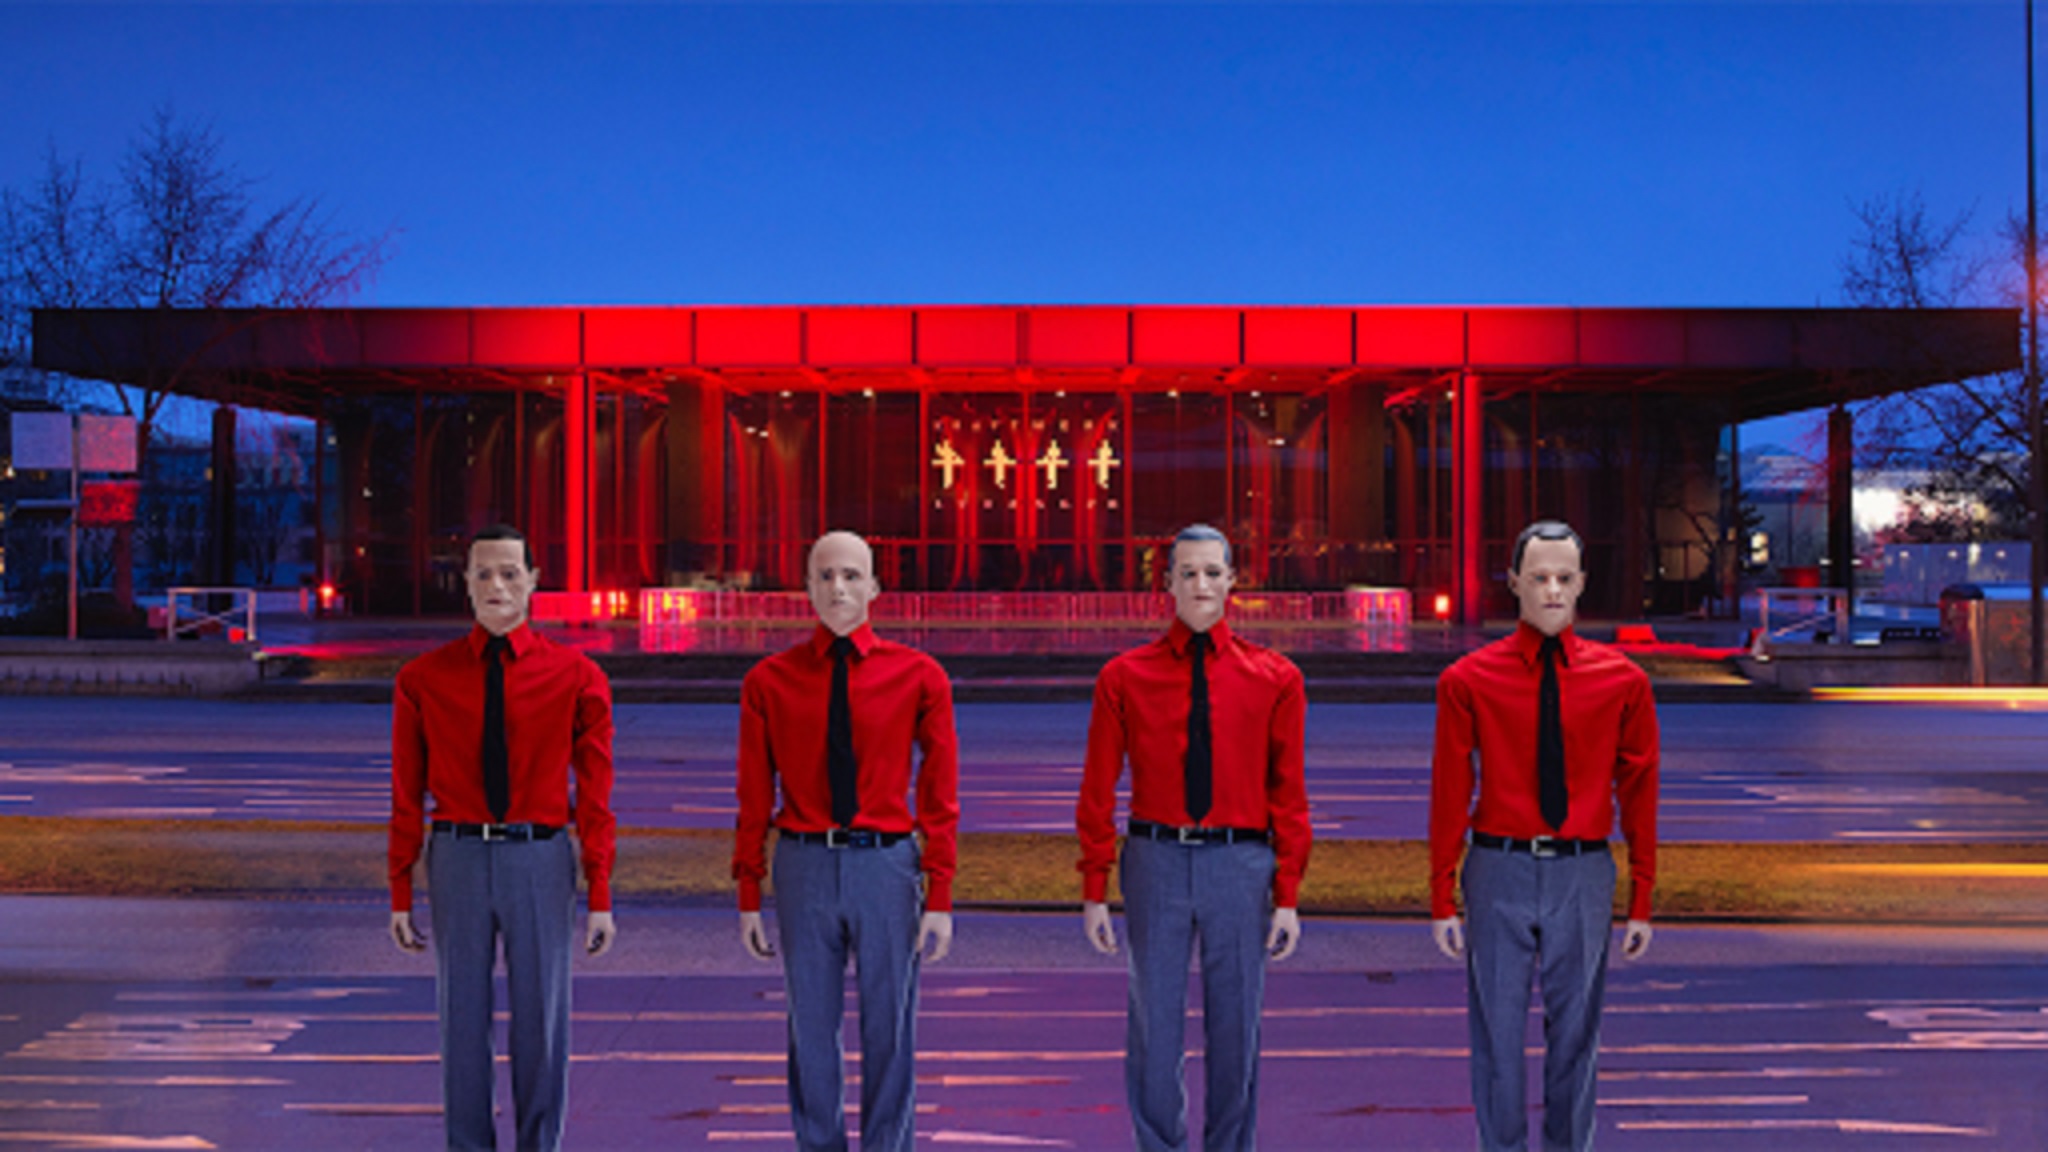 KRAFTWERK To Return to North America for a 3-D Summer Concert Tour Starting May 2022 – New Dates Announced